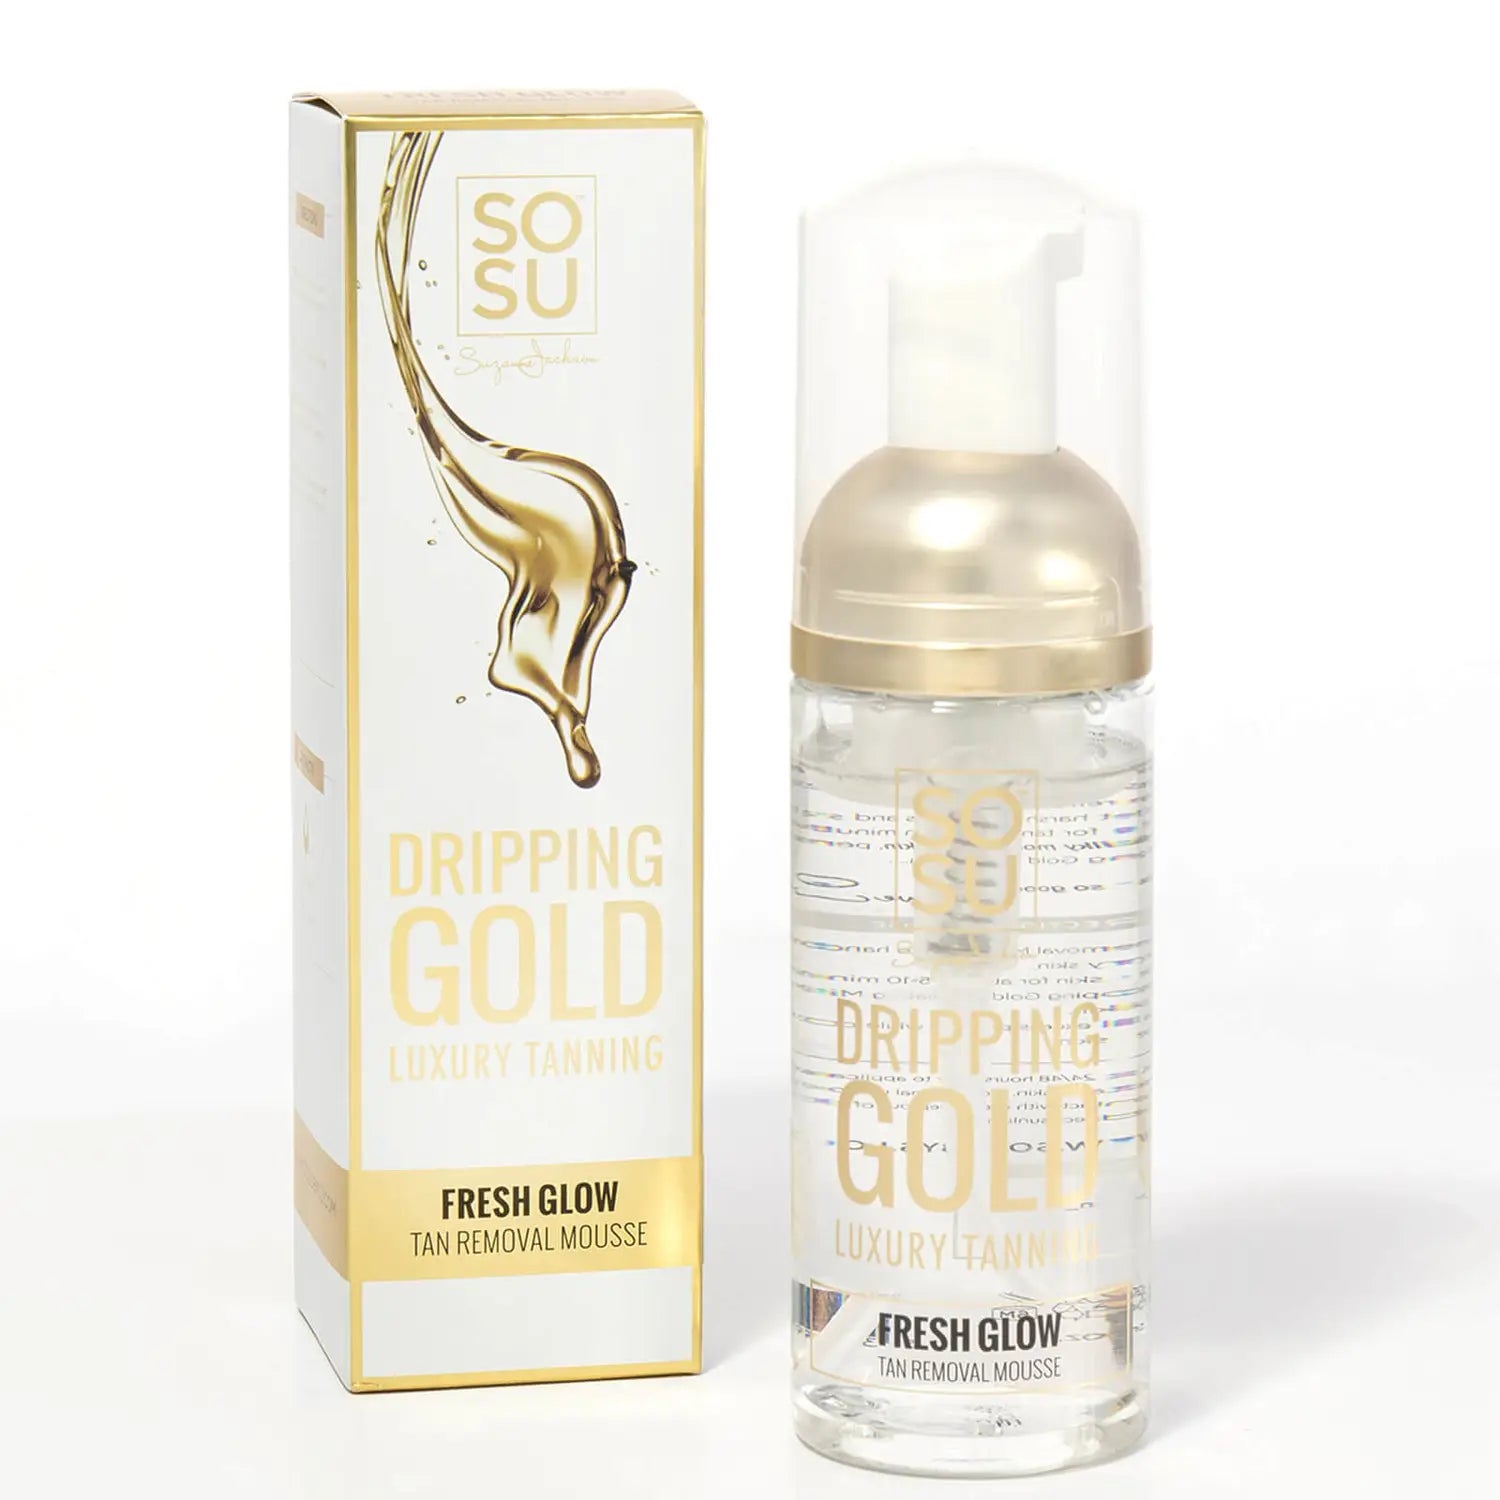 Sosu Dripping Gold Dripping Gold Tan Remover Mousse